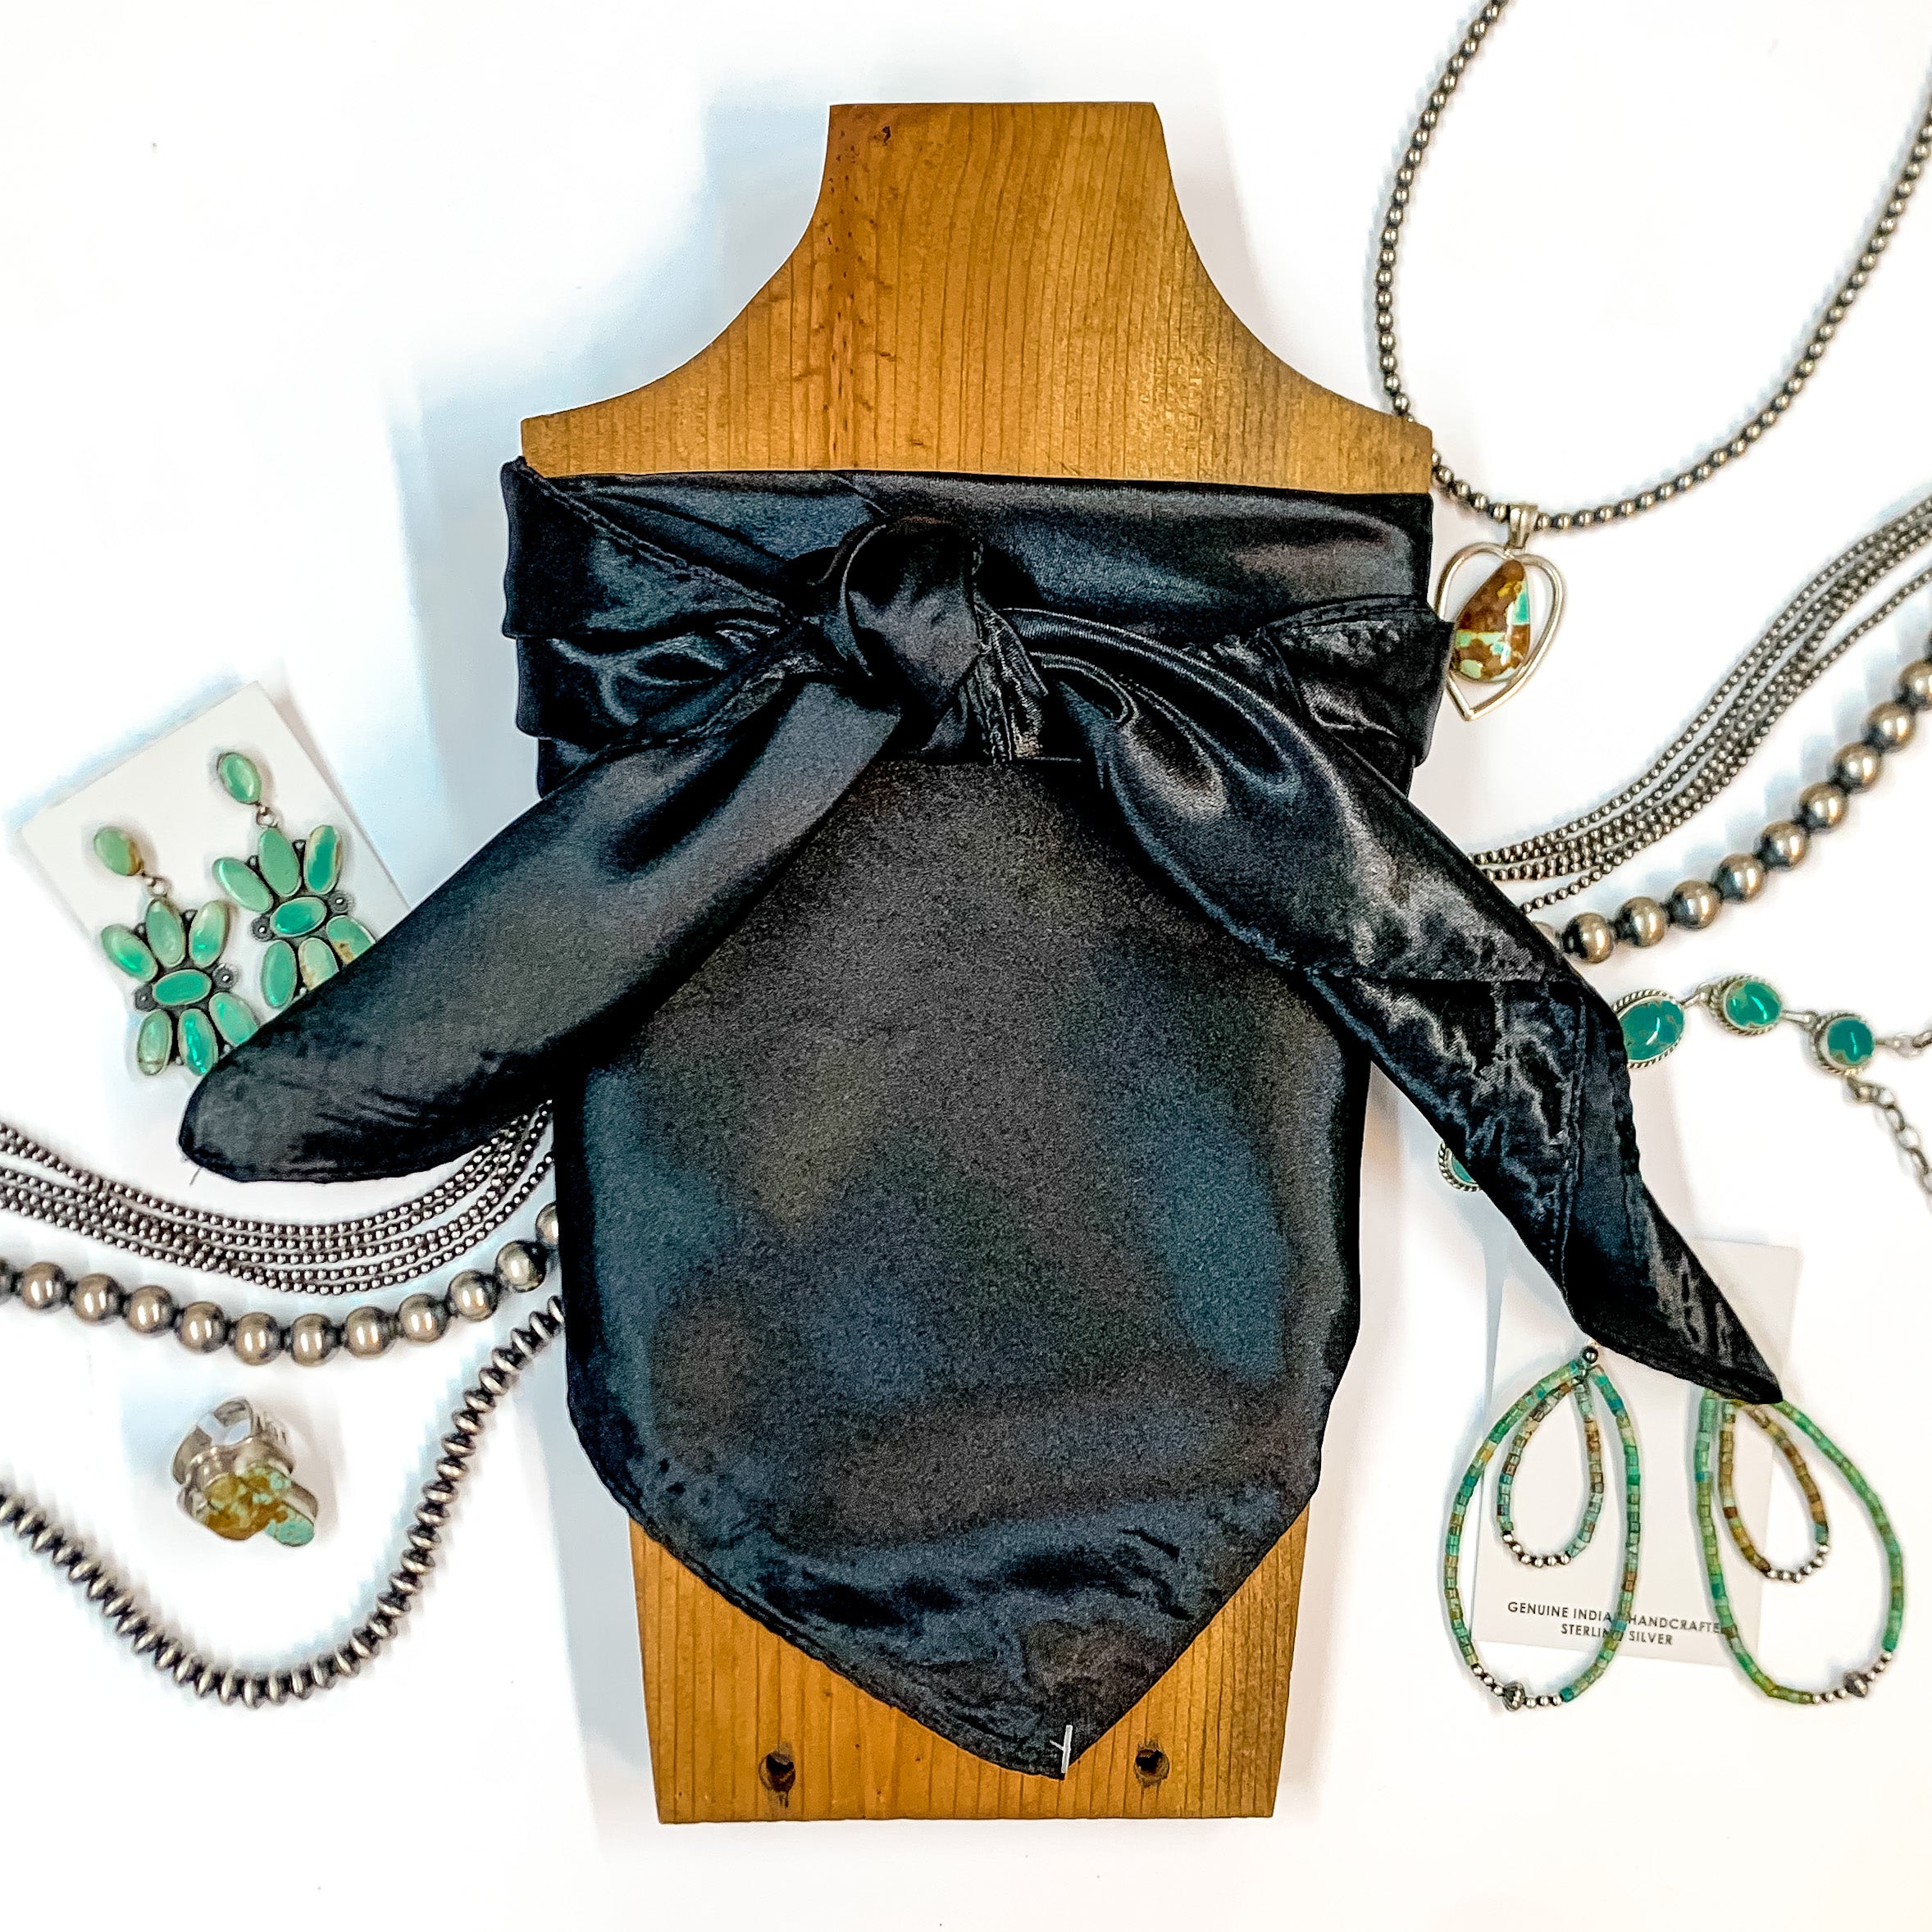 Solid colored scarf in Black. Scarf is tied around a wooden piece. The scarf and piece of wood is pictured on a white background with Navajo jewelry spread out around it.